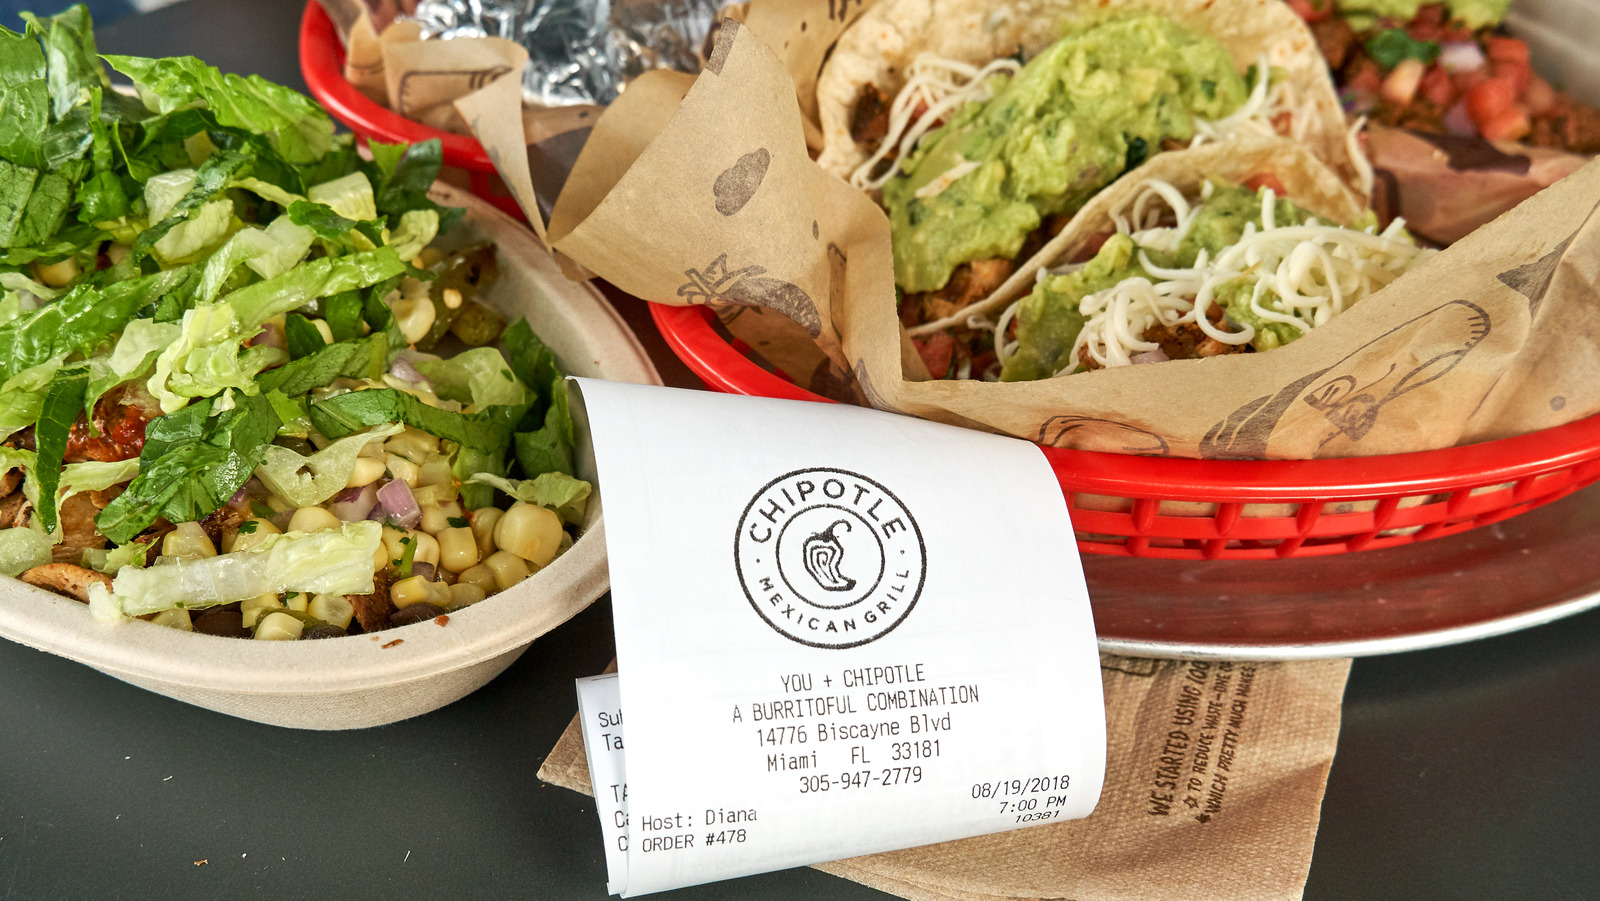 Is It Actually Worth It To Order Chipotle Catering For Meal Prep? – The Daily Meal